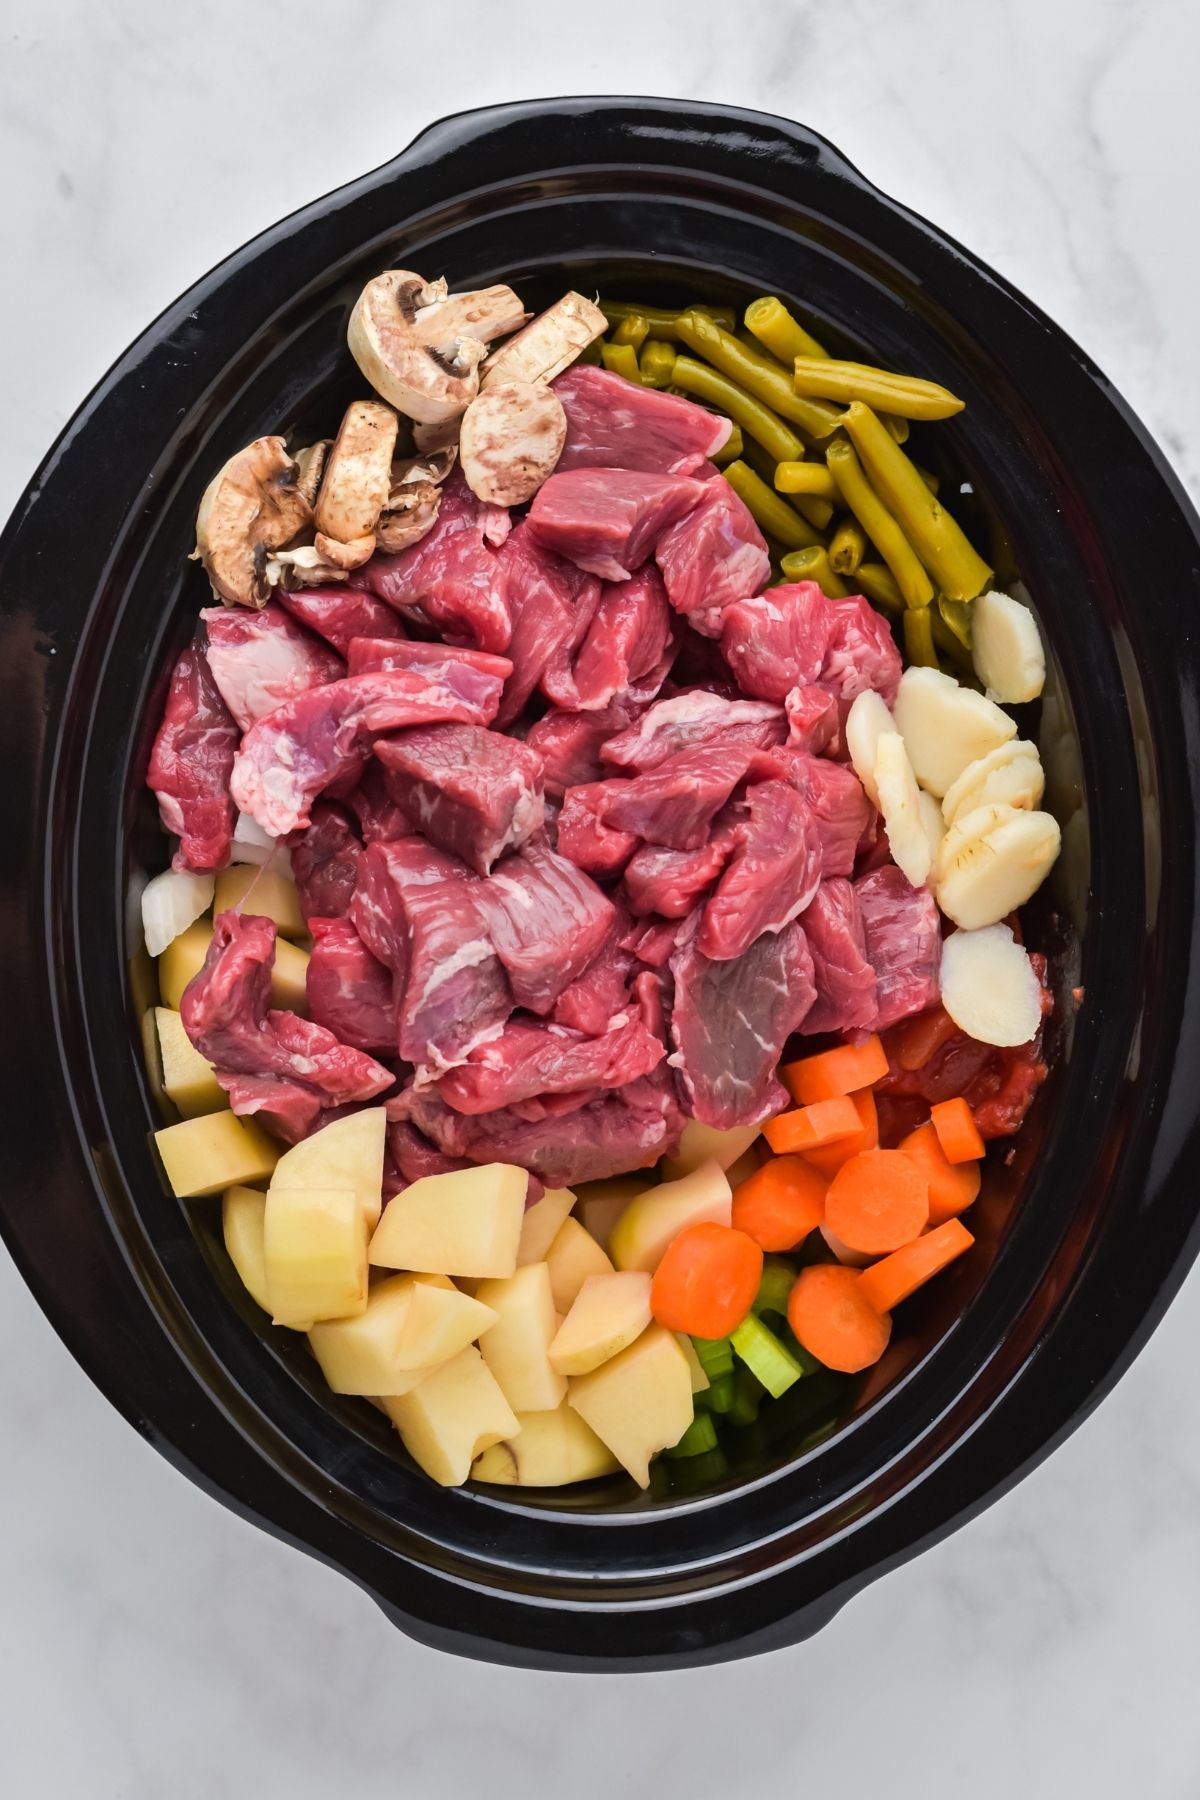 hing says comfort food on a cold night like a hot bowl of this homemade Crockpot Beef Stew. Tender chunks of beef, veggies, and potatoes cook together in a delicious tomato and beef broth. 